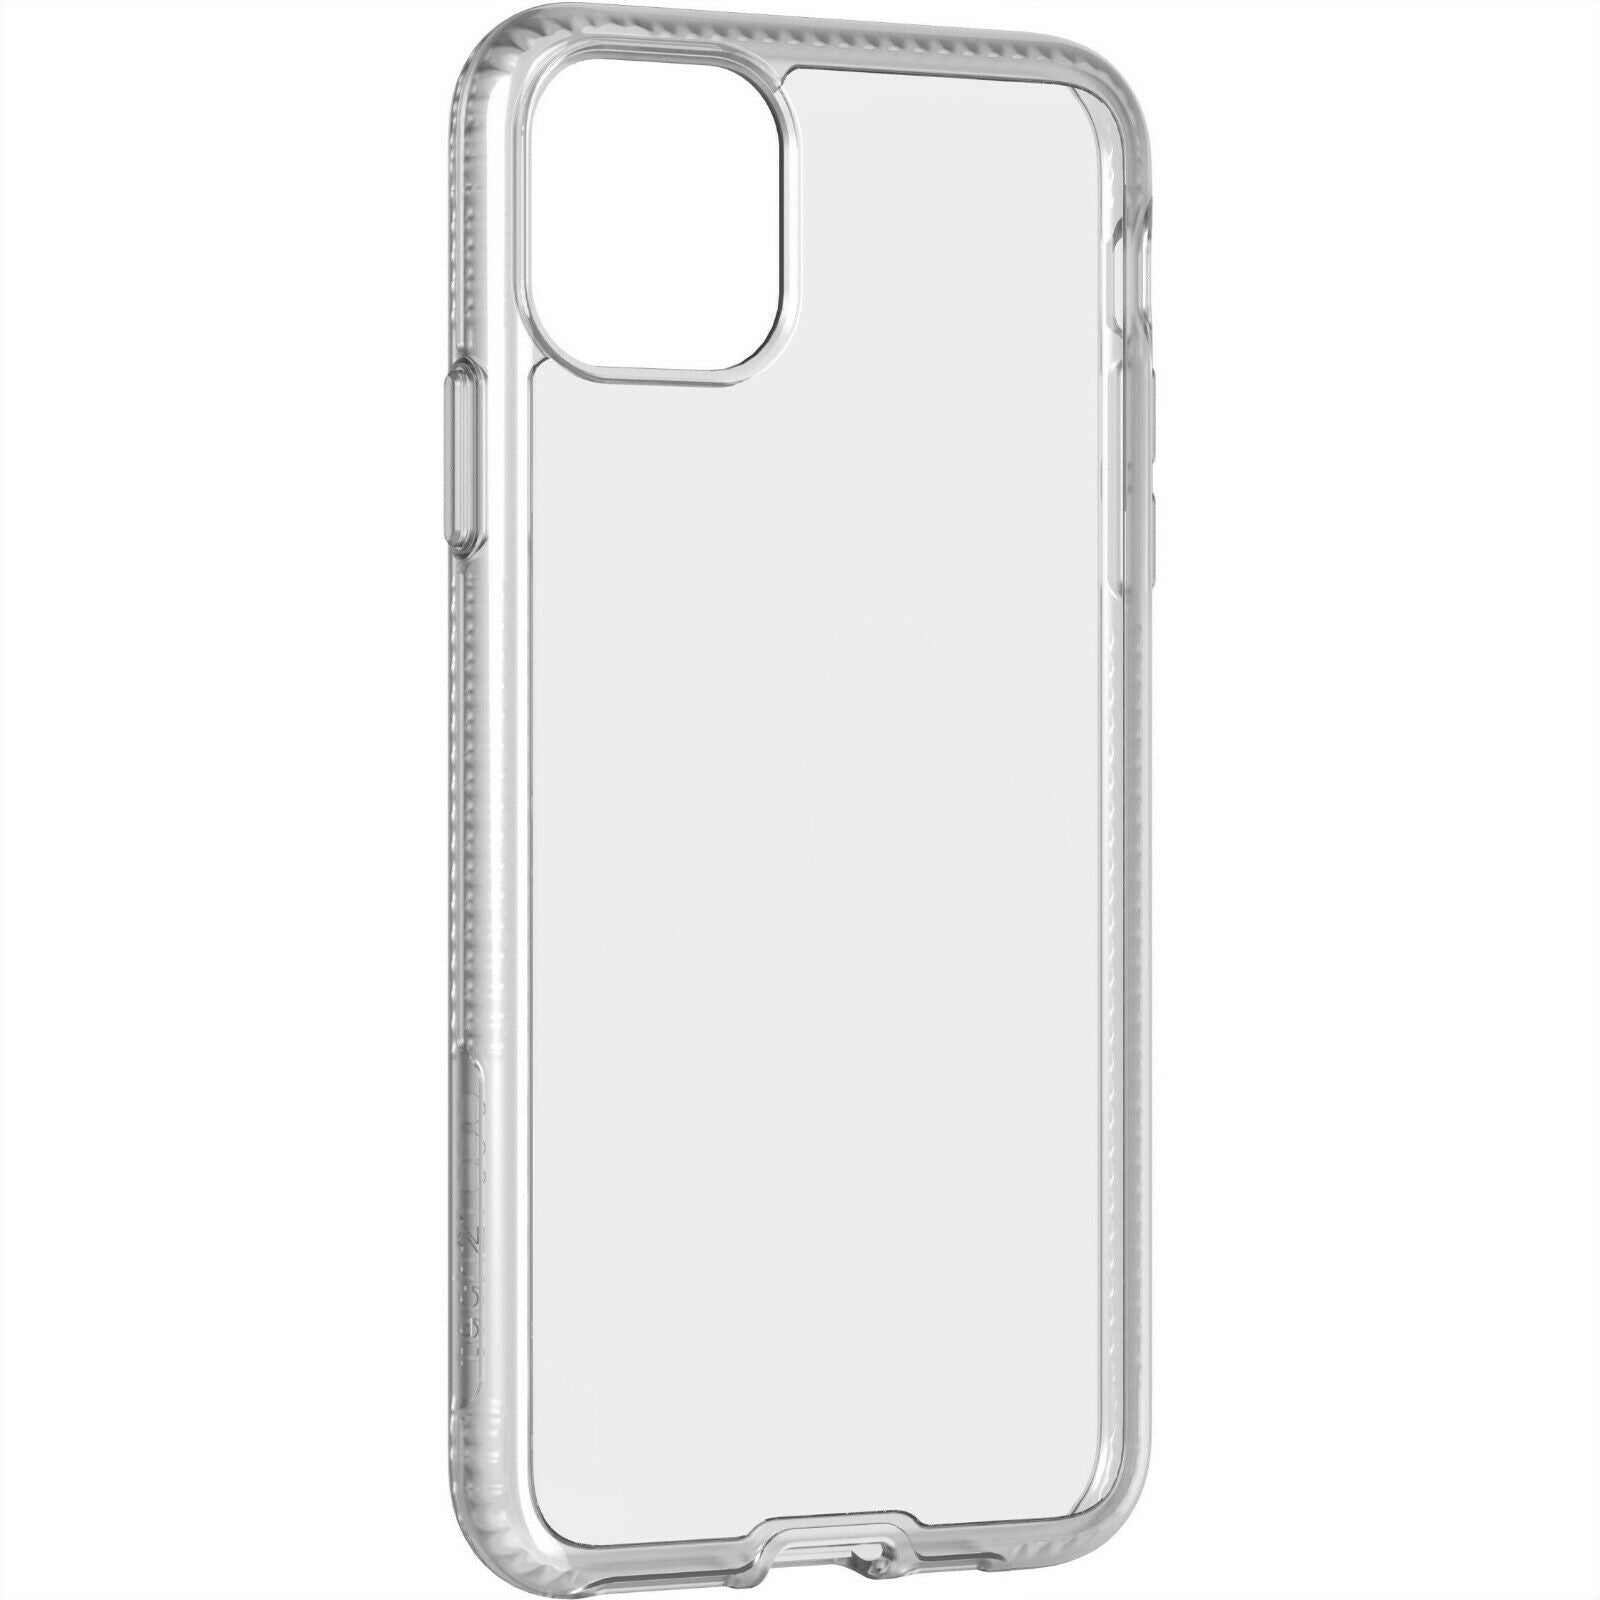 iPhone Tech21 Pure Clear Antimicrobial Shockproof Slim Protection Case for Apple iPhone